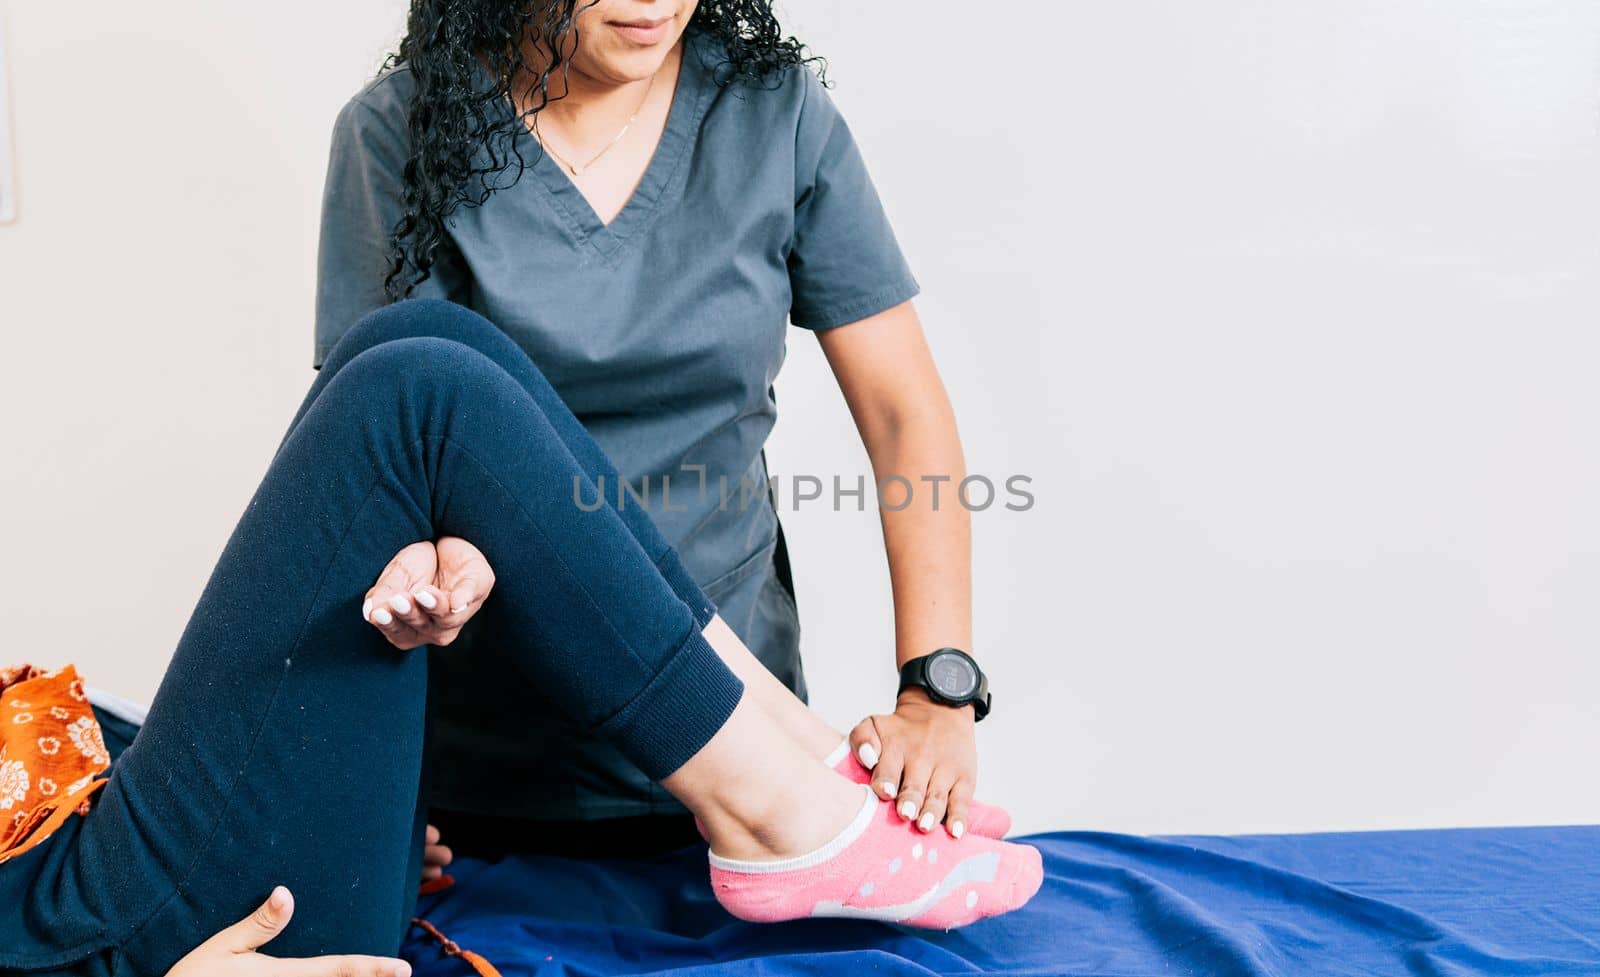 Professional physiotherapist assisting patient in leg rehabilitation, Modern leg rehabilitation physiotherapy, Worker in modern physiotherapy assisting female patient by isaiphoto